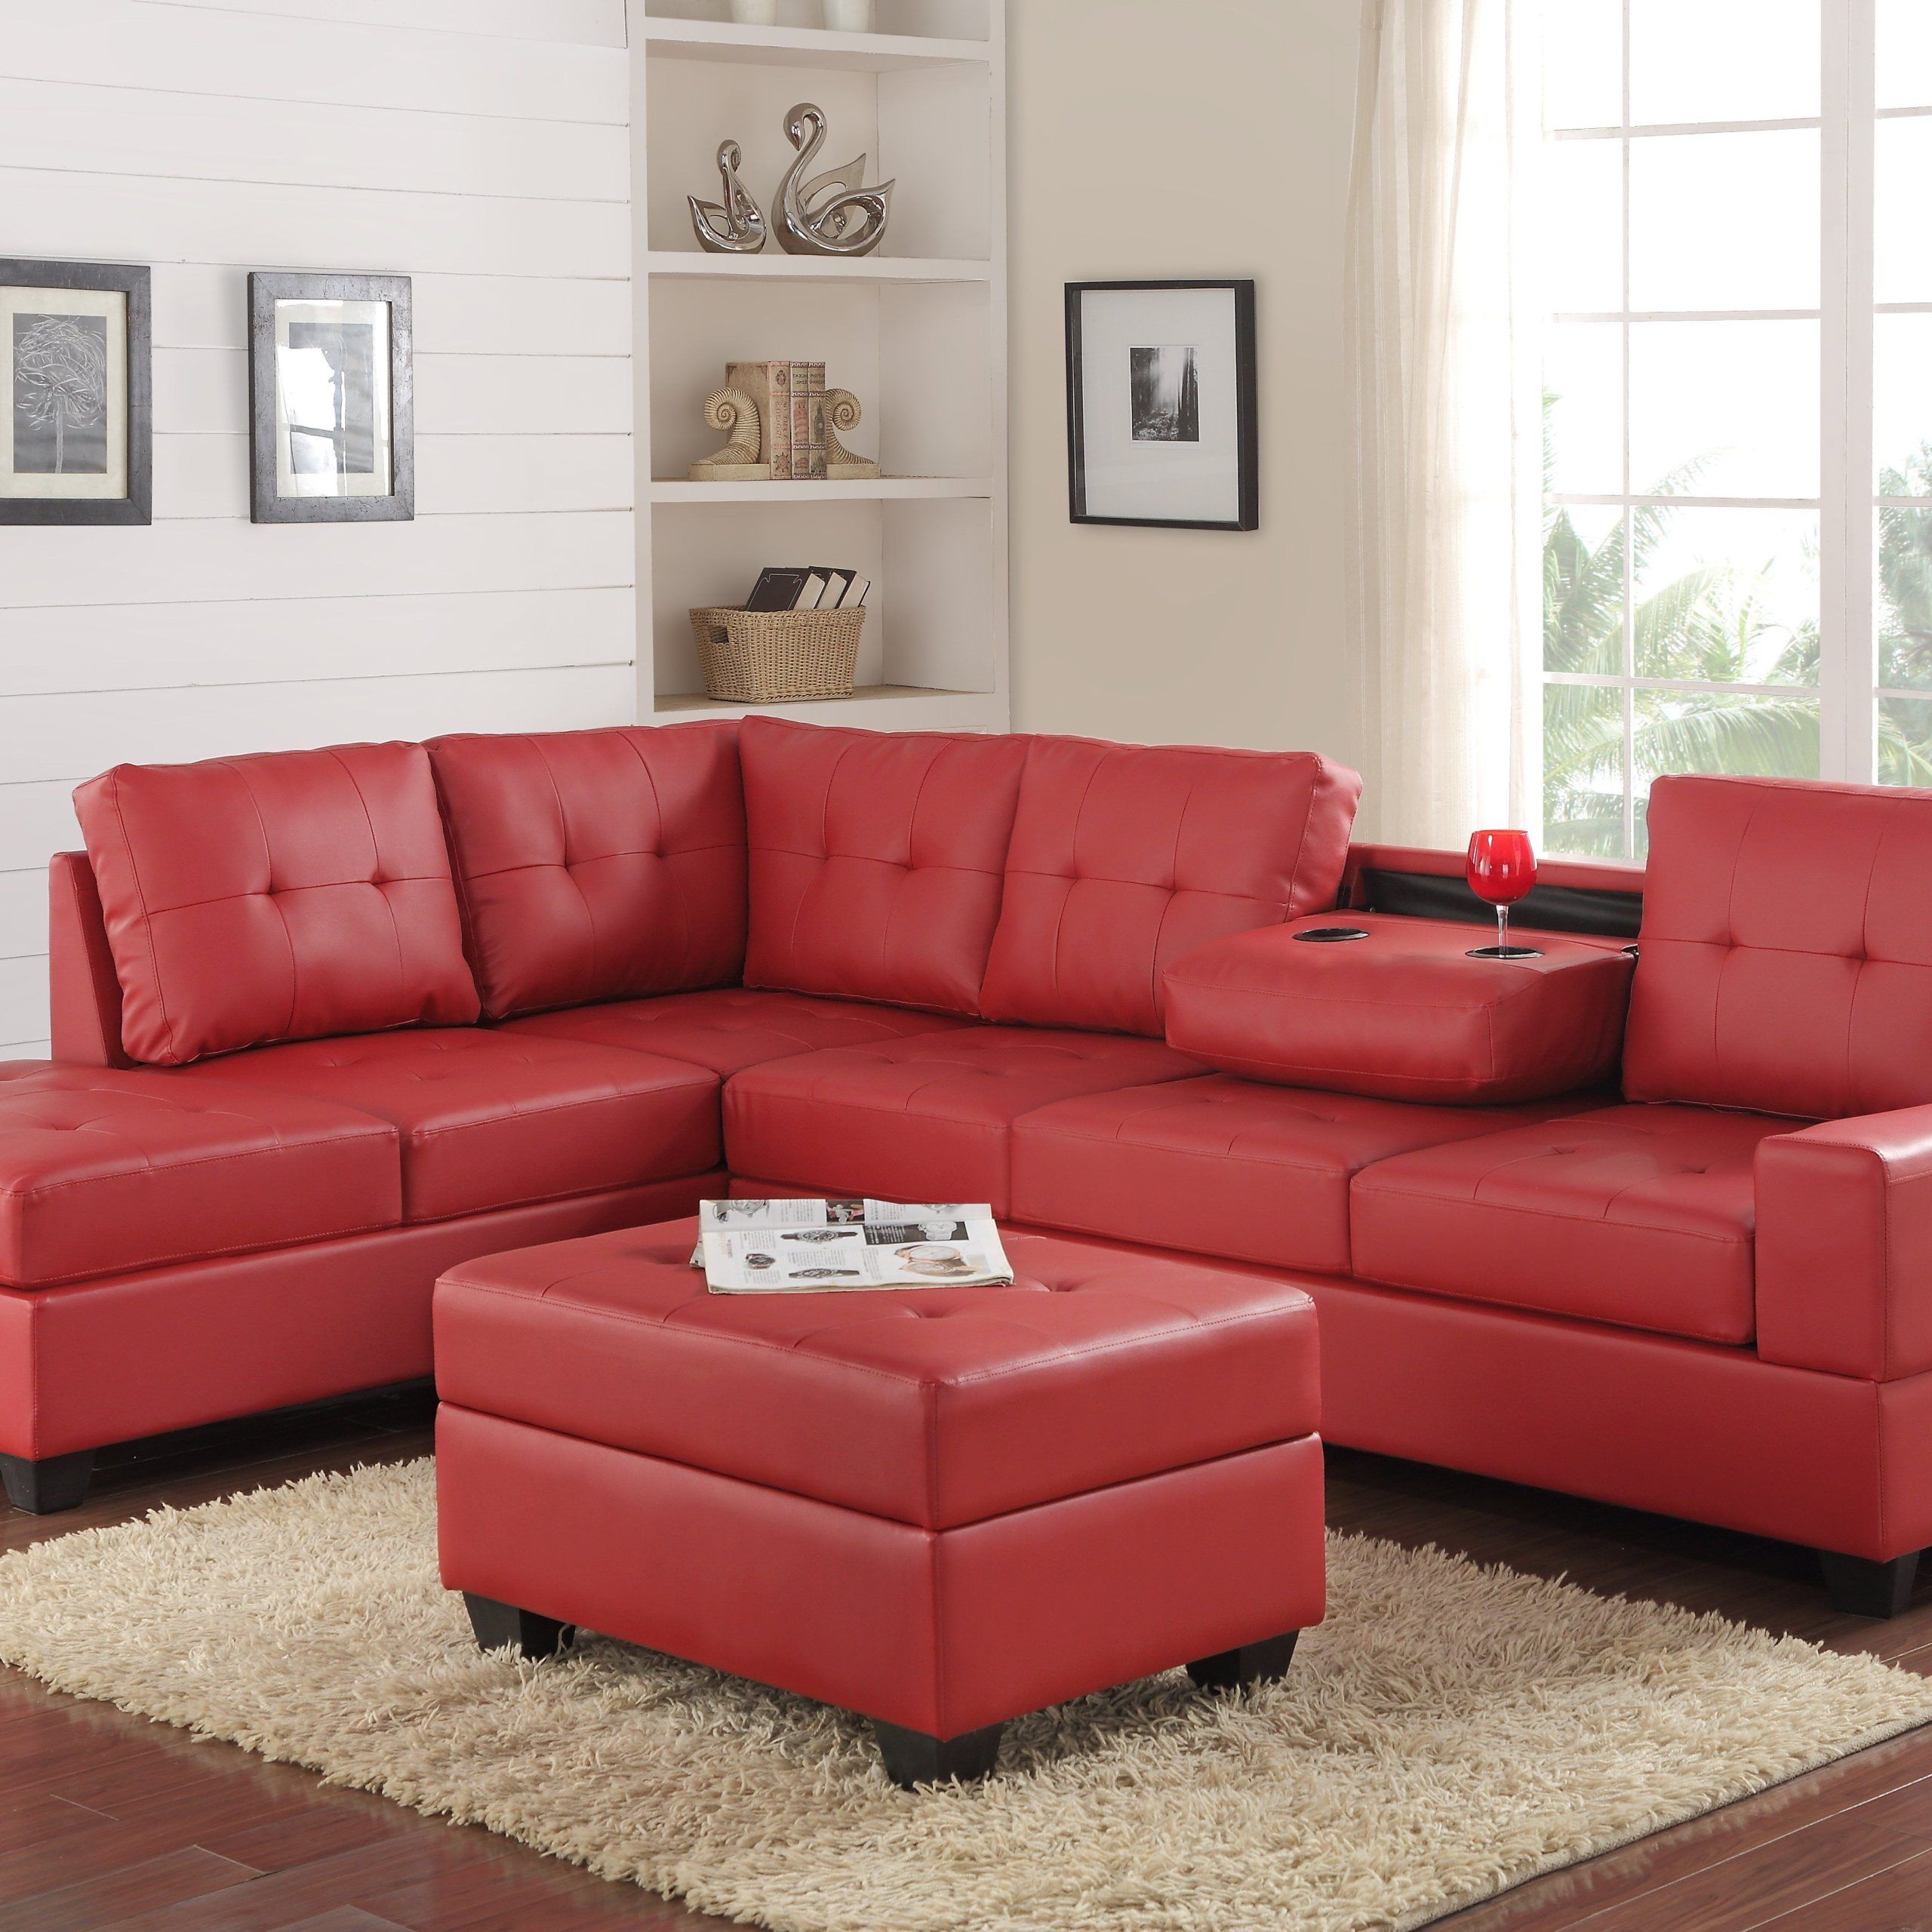 Most Popular Heights Faux Leather Reversible Sectional With Storage Ottoman Regarding Faux Leather Sectional Sofa Sets (View 9 of 15)